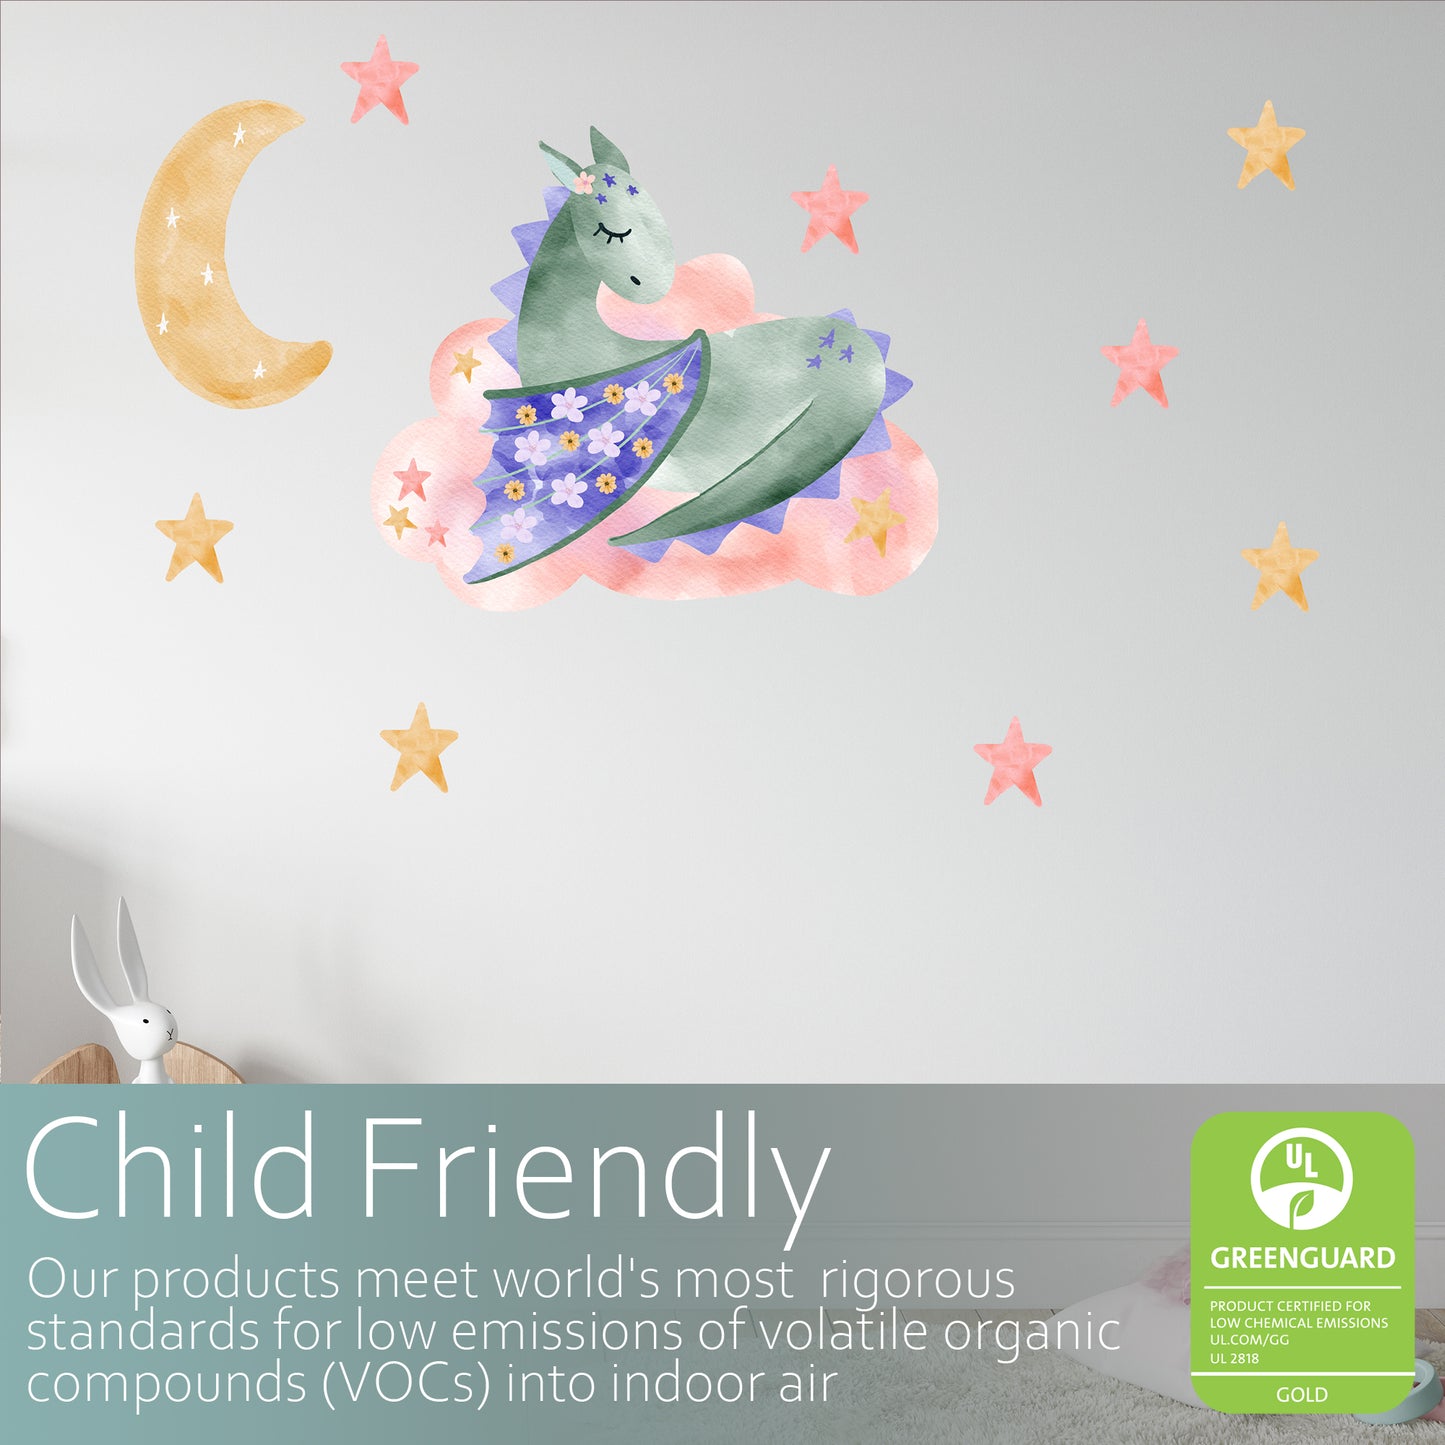 Watercolour dragon on a cloud | Fabric wall stickers